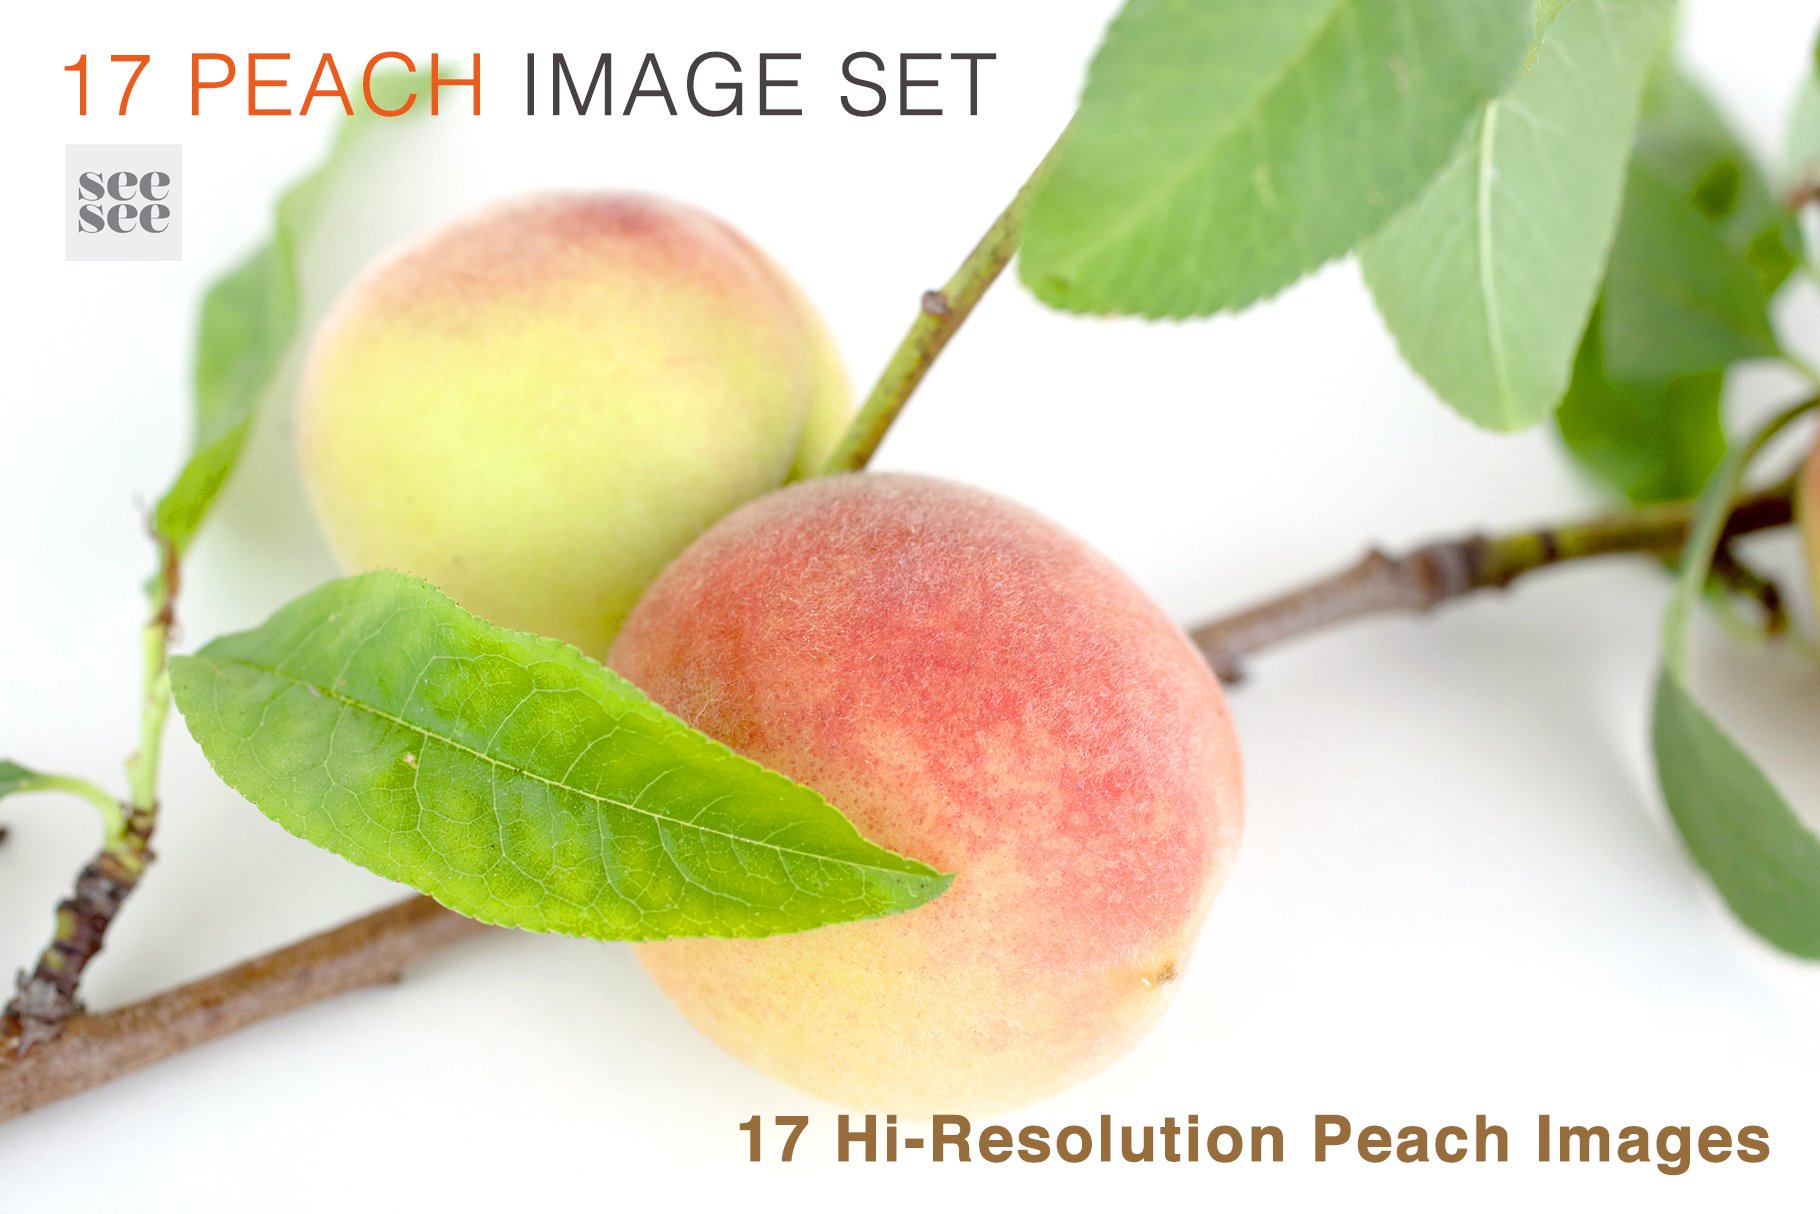 You will get 17 hi-resolution peach images.